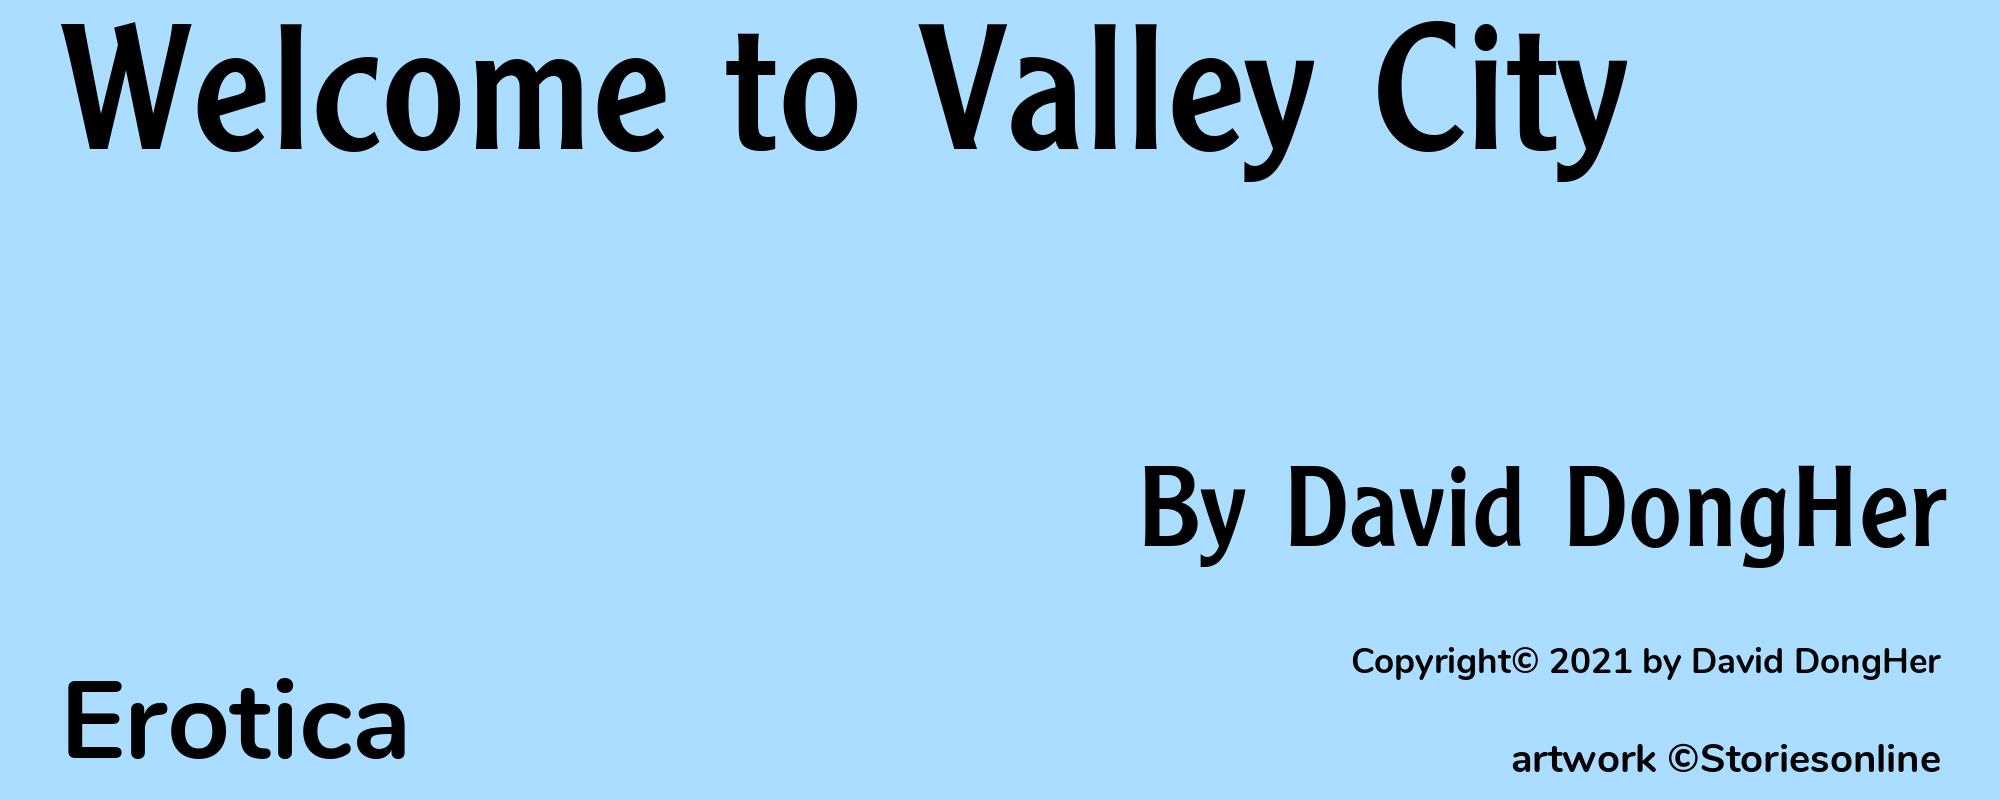 Welcome to Valley City - Cover